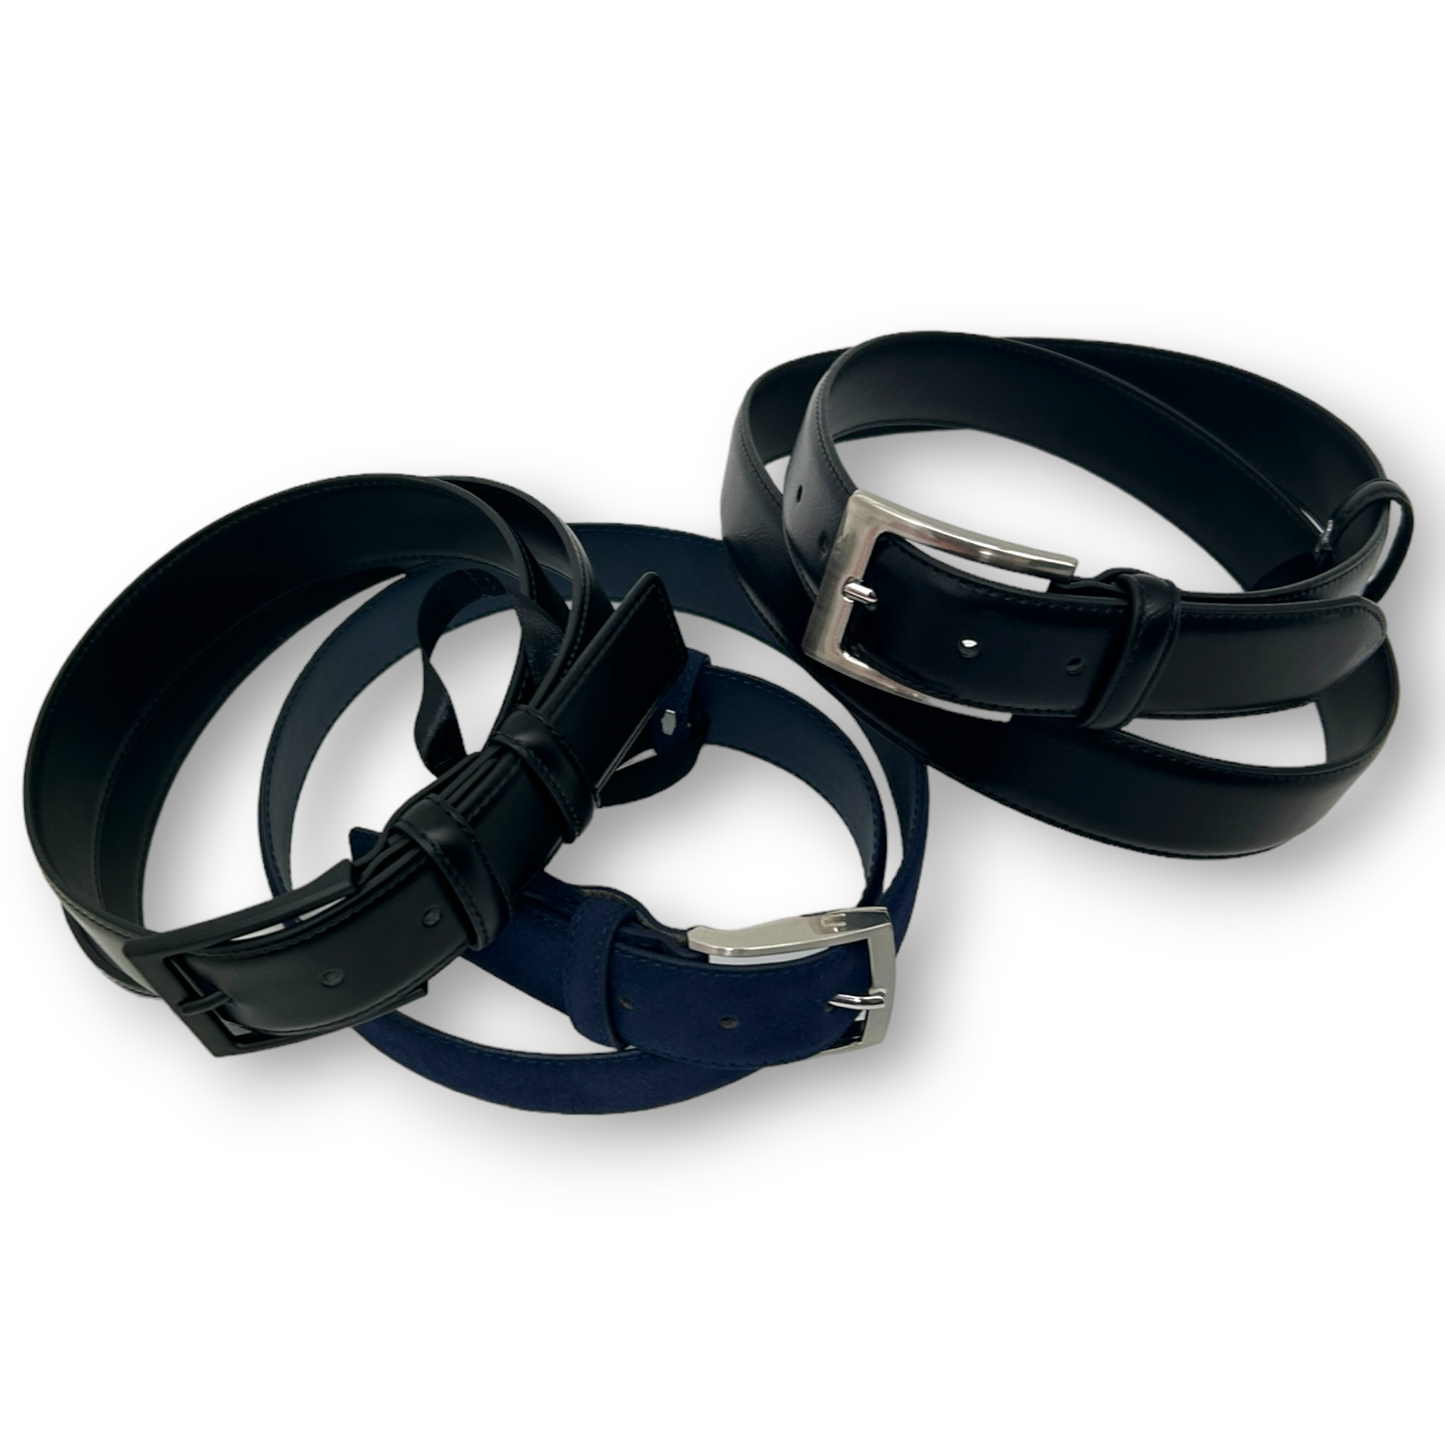 Safekeepers belts - belt suede - 2 pieces